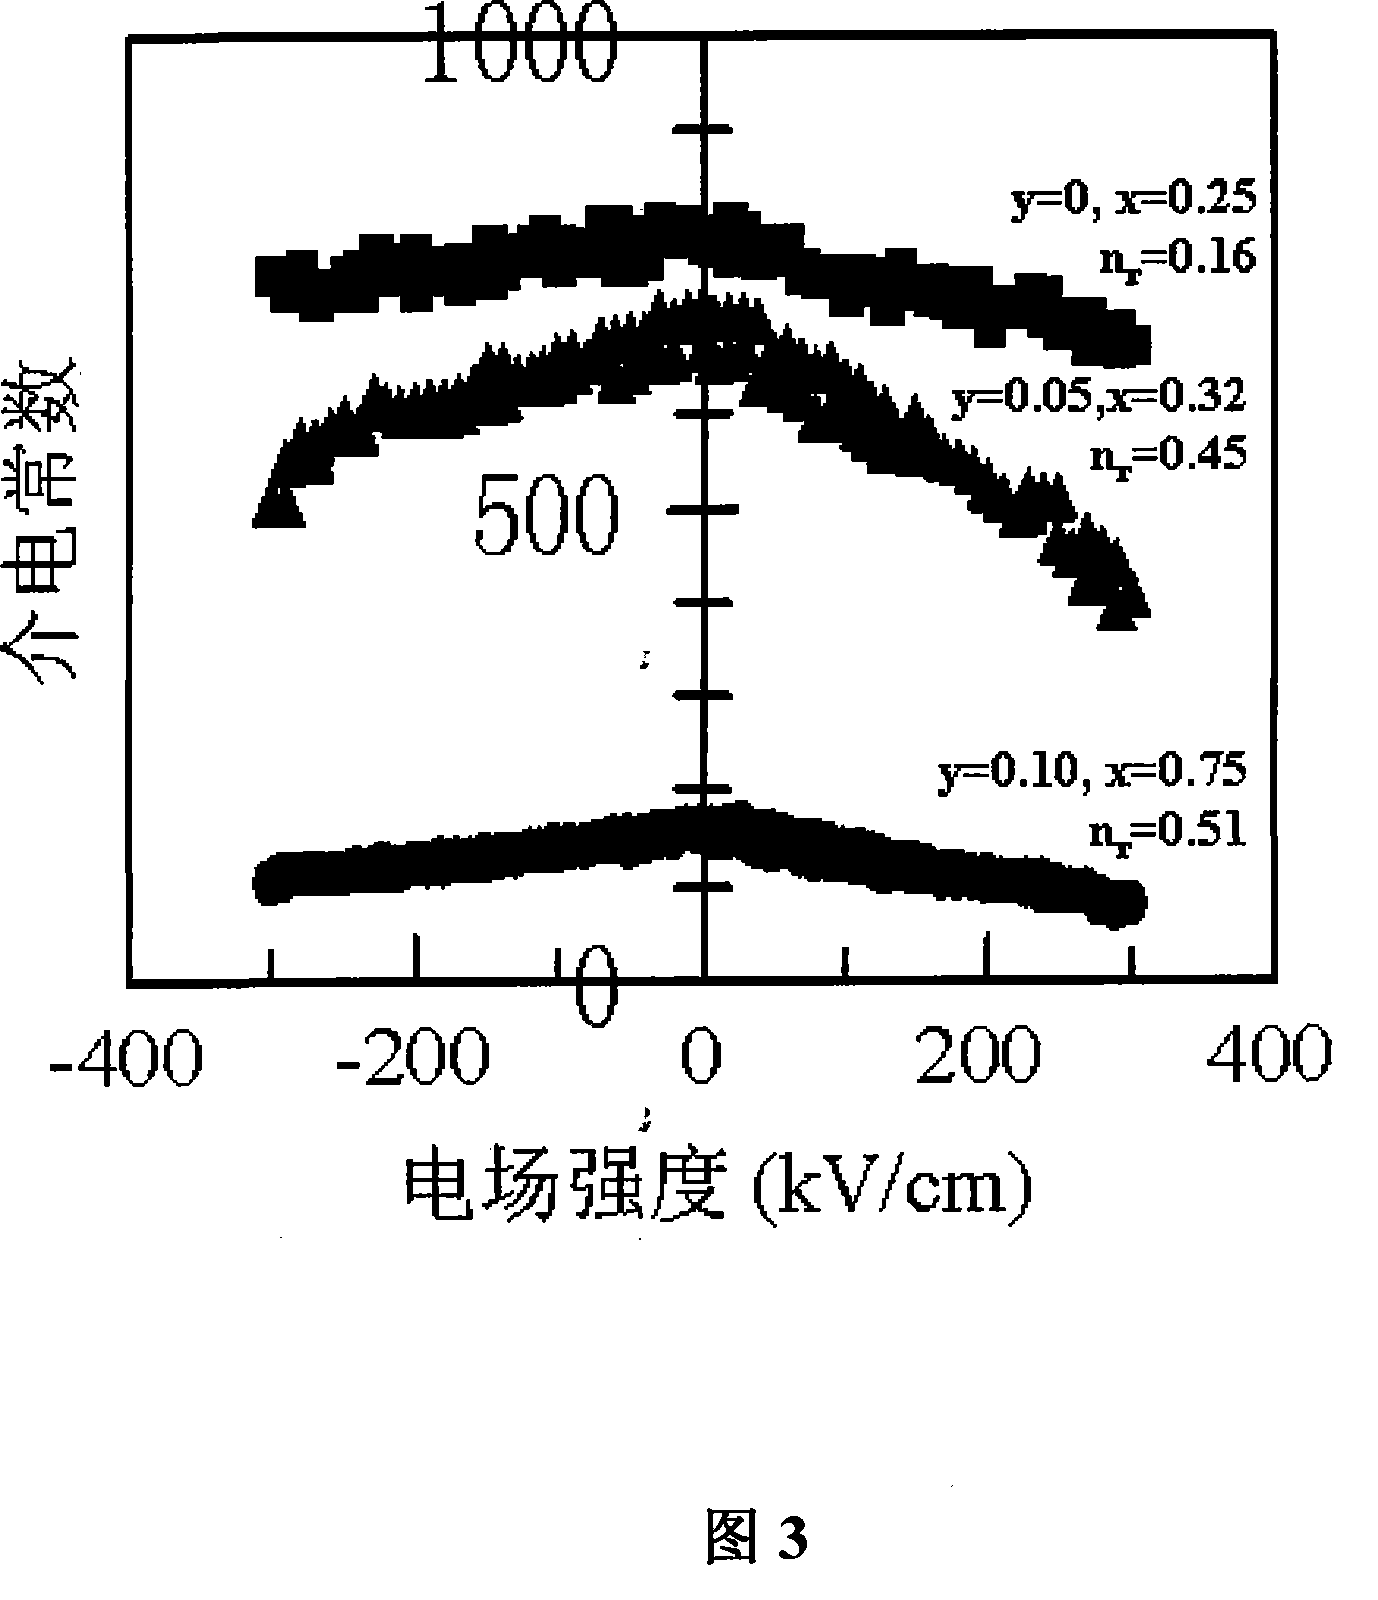 Multiple phase ceramic material with adjustable dielectric